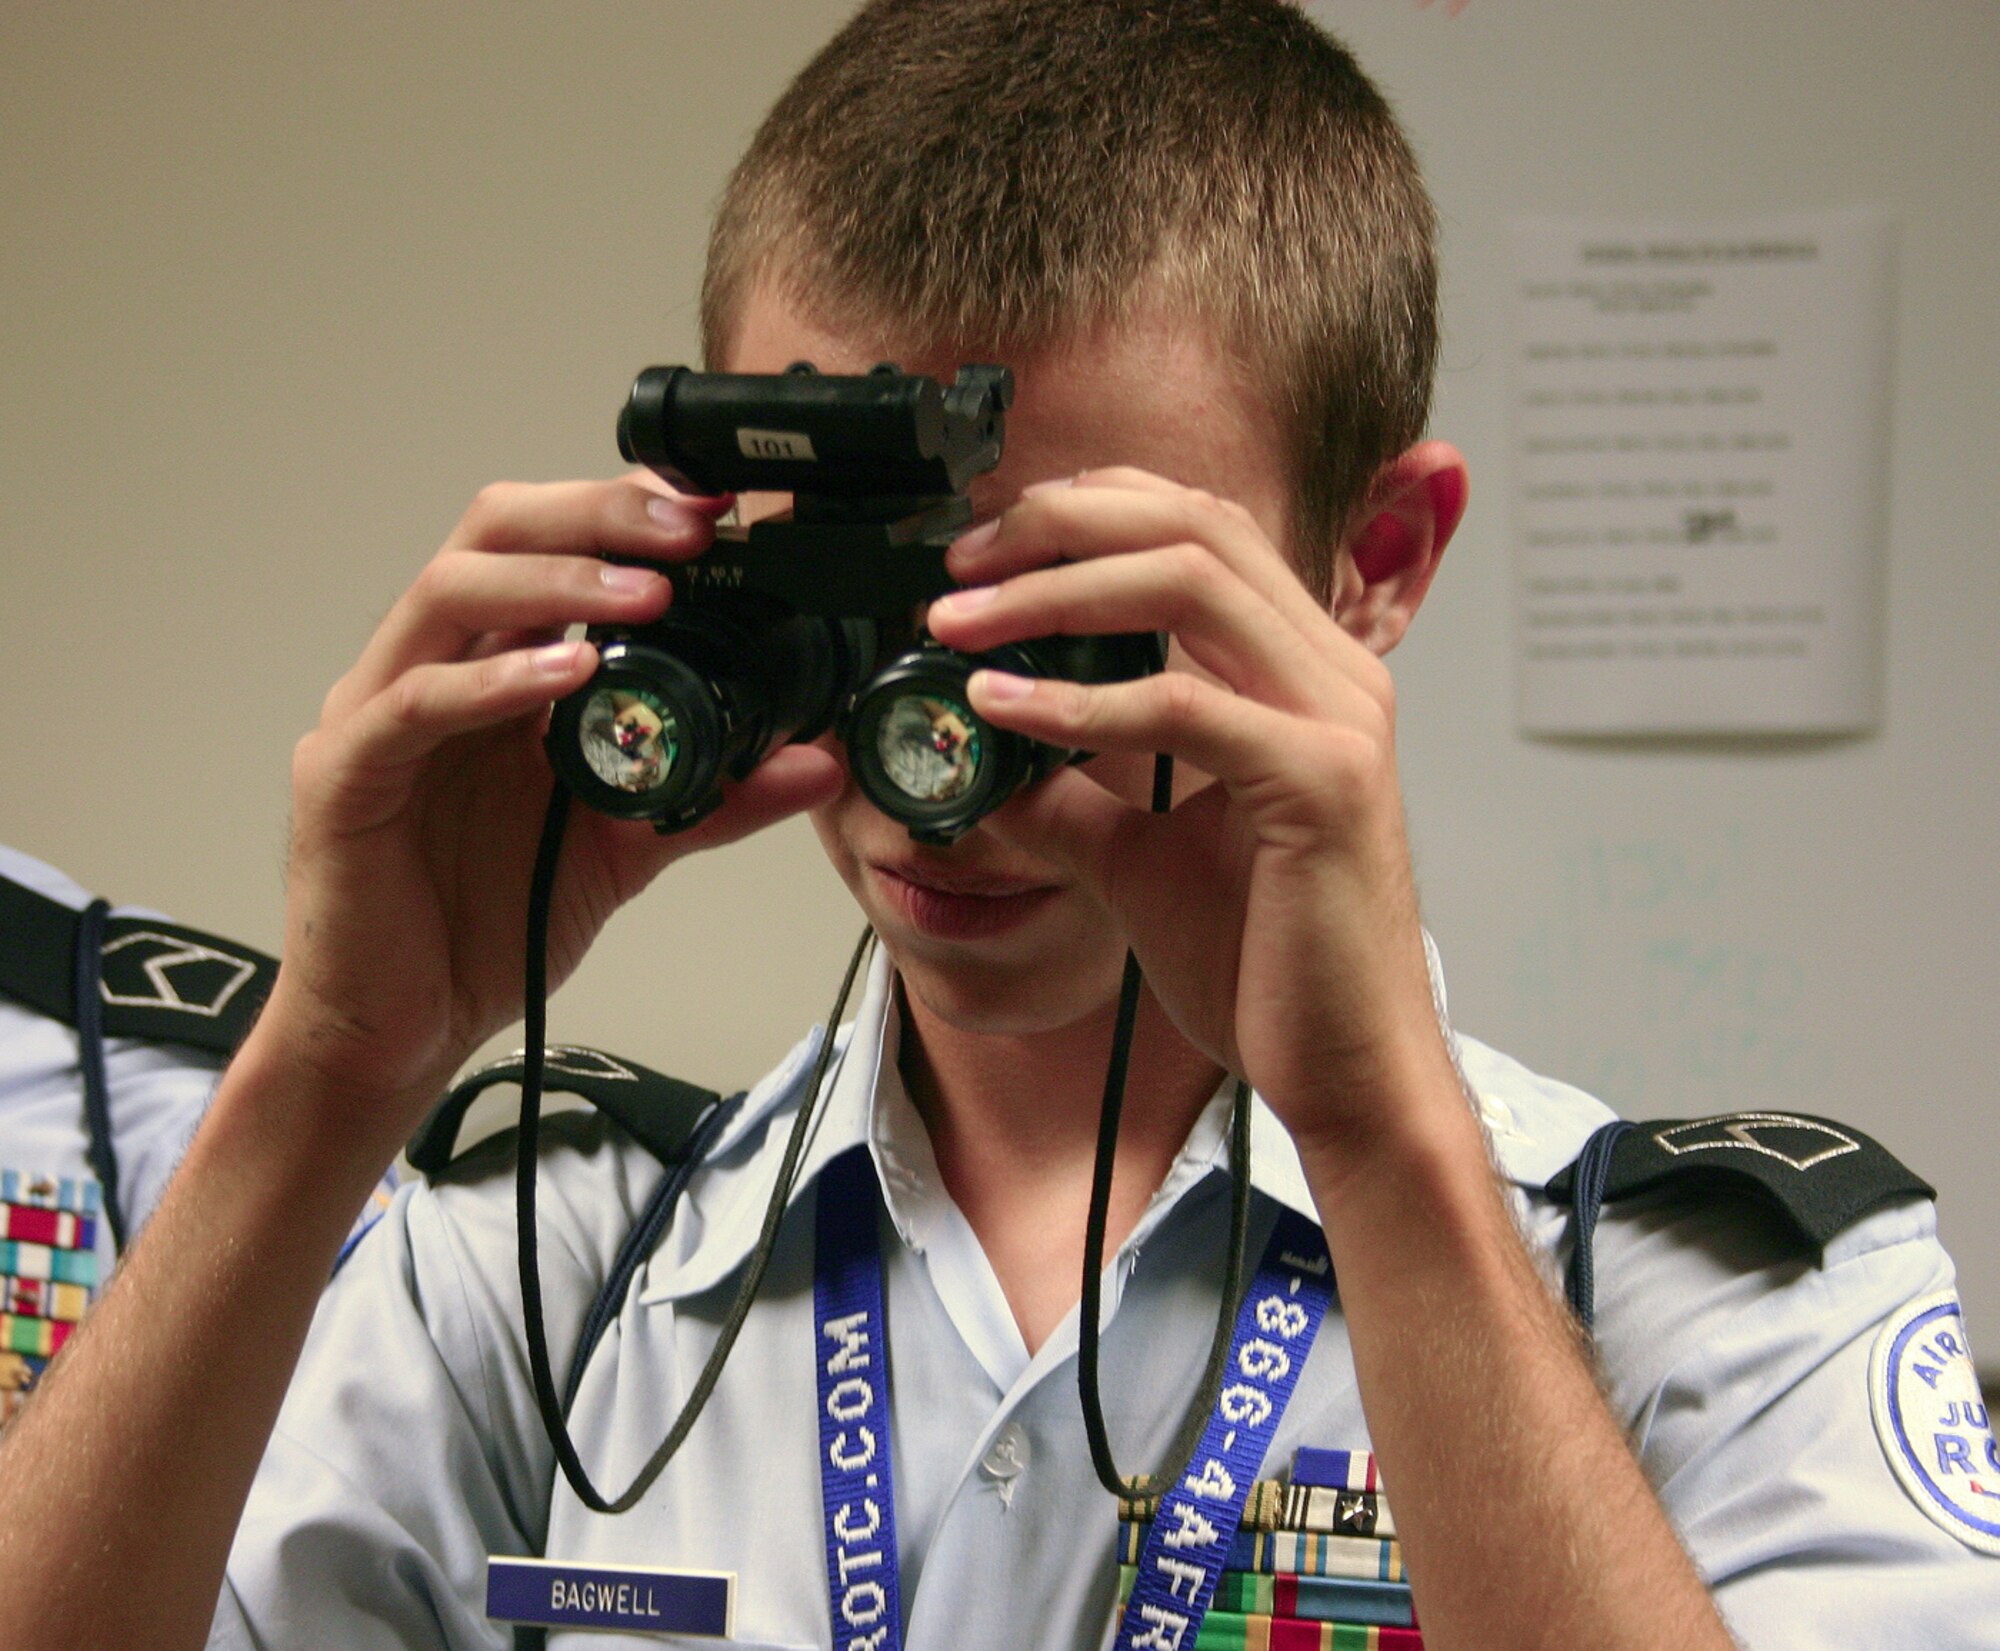 Junior ROTC Cadet Nicolas Bagwell from Texas tries out a pair of night vision goggles during a visit to the 58th Special Operations Wing at Kirtland Air Force Base, N.M . More than 50 cadets from 20 states nationwide visited the 58th SOW as part of the 2008 Air Force Junior ROTC Aerospace and Technology Honor Camp held July 26-31. (U.S. Air Force photo/Staff Sgt. Jason Lake)